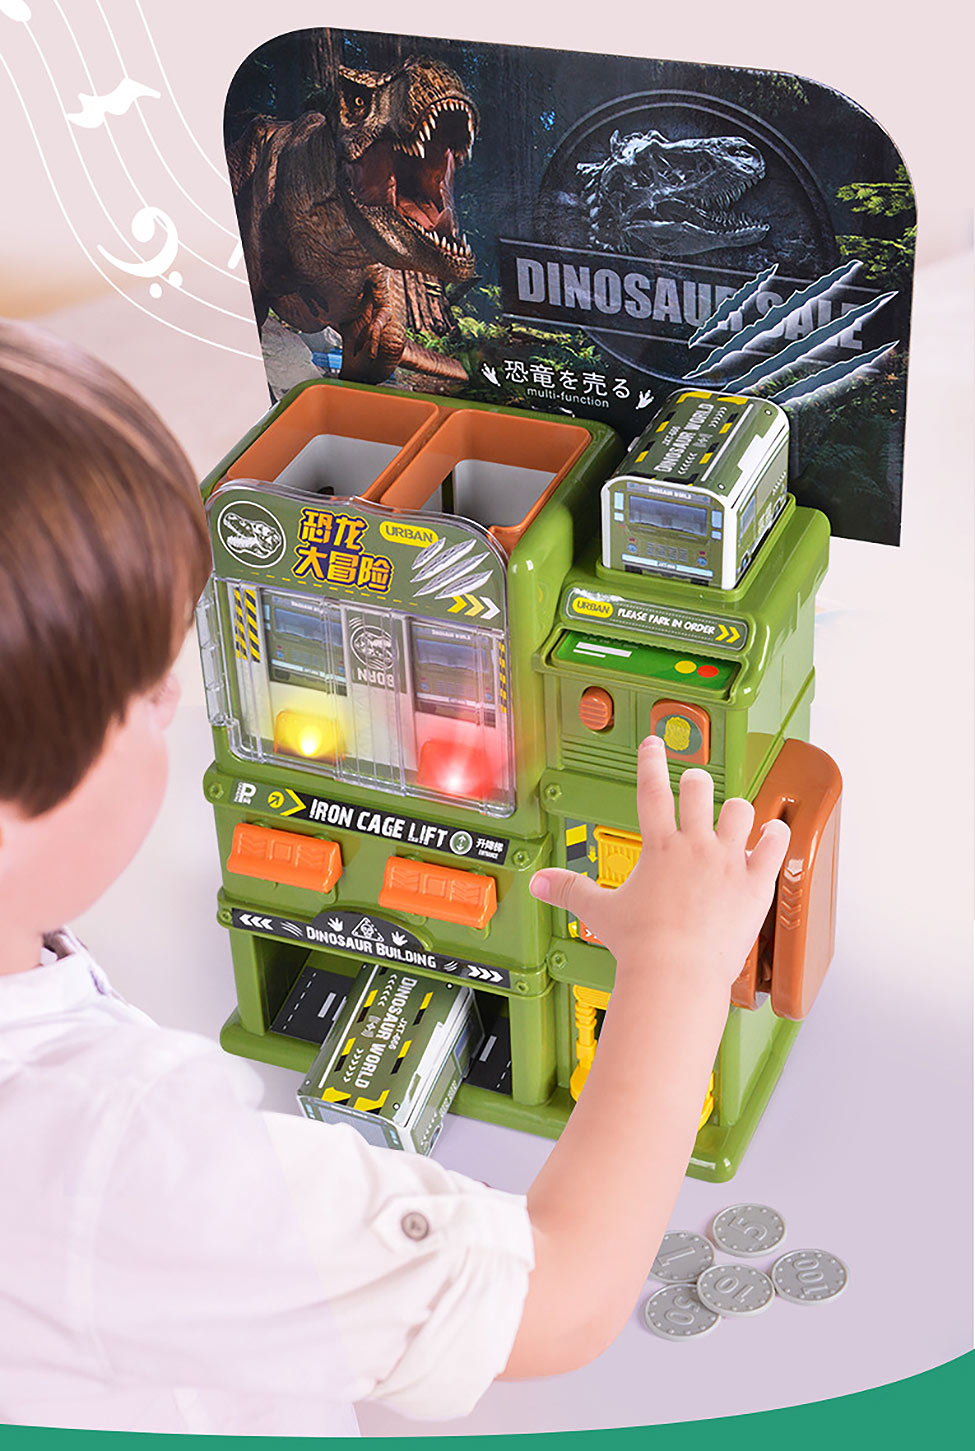 Automatic-Dinosaur-Building-Vending-Machine-Toy-with-10-Dinosaur-Statues-9